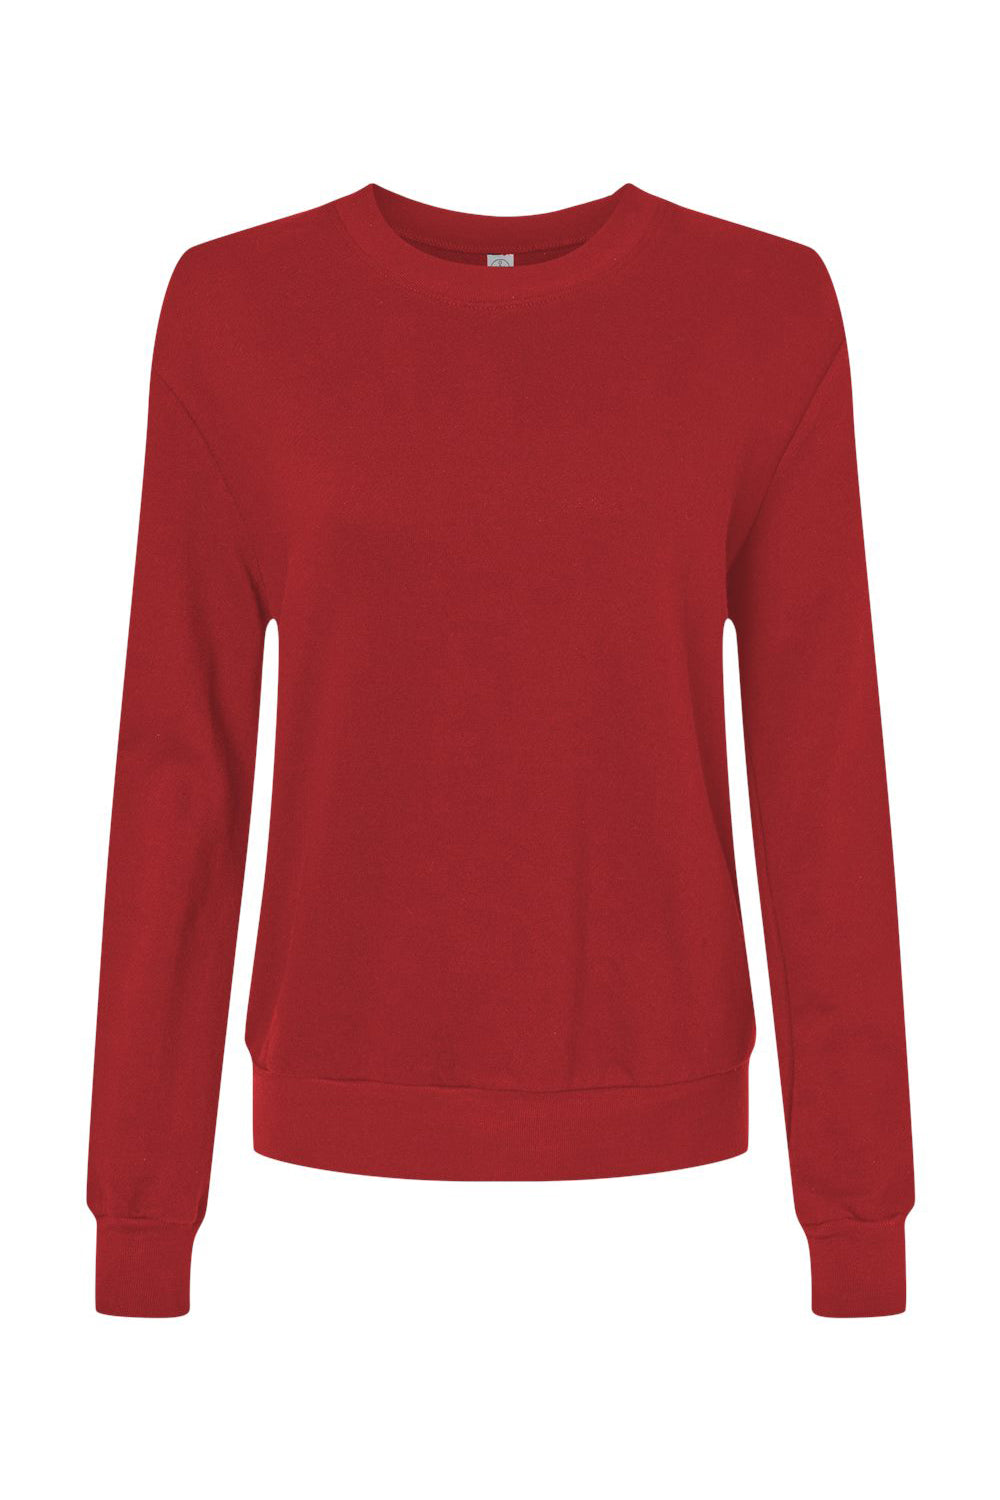 Alternative 9903ZT Womens Eco Washed Throwback Crewneck Sweatshirt Faded Red Flat Front